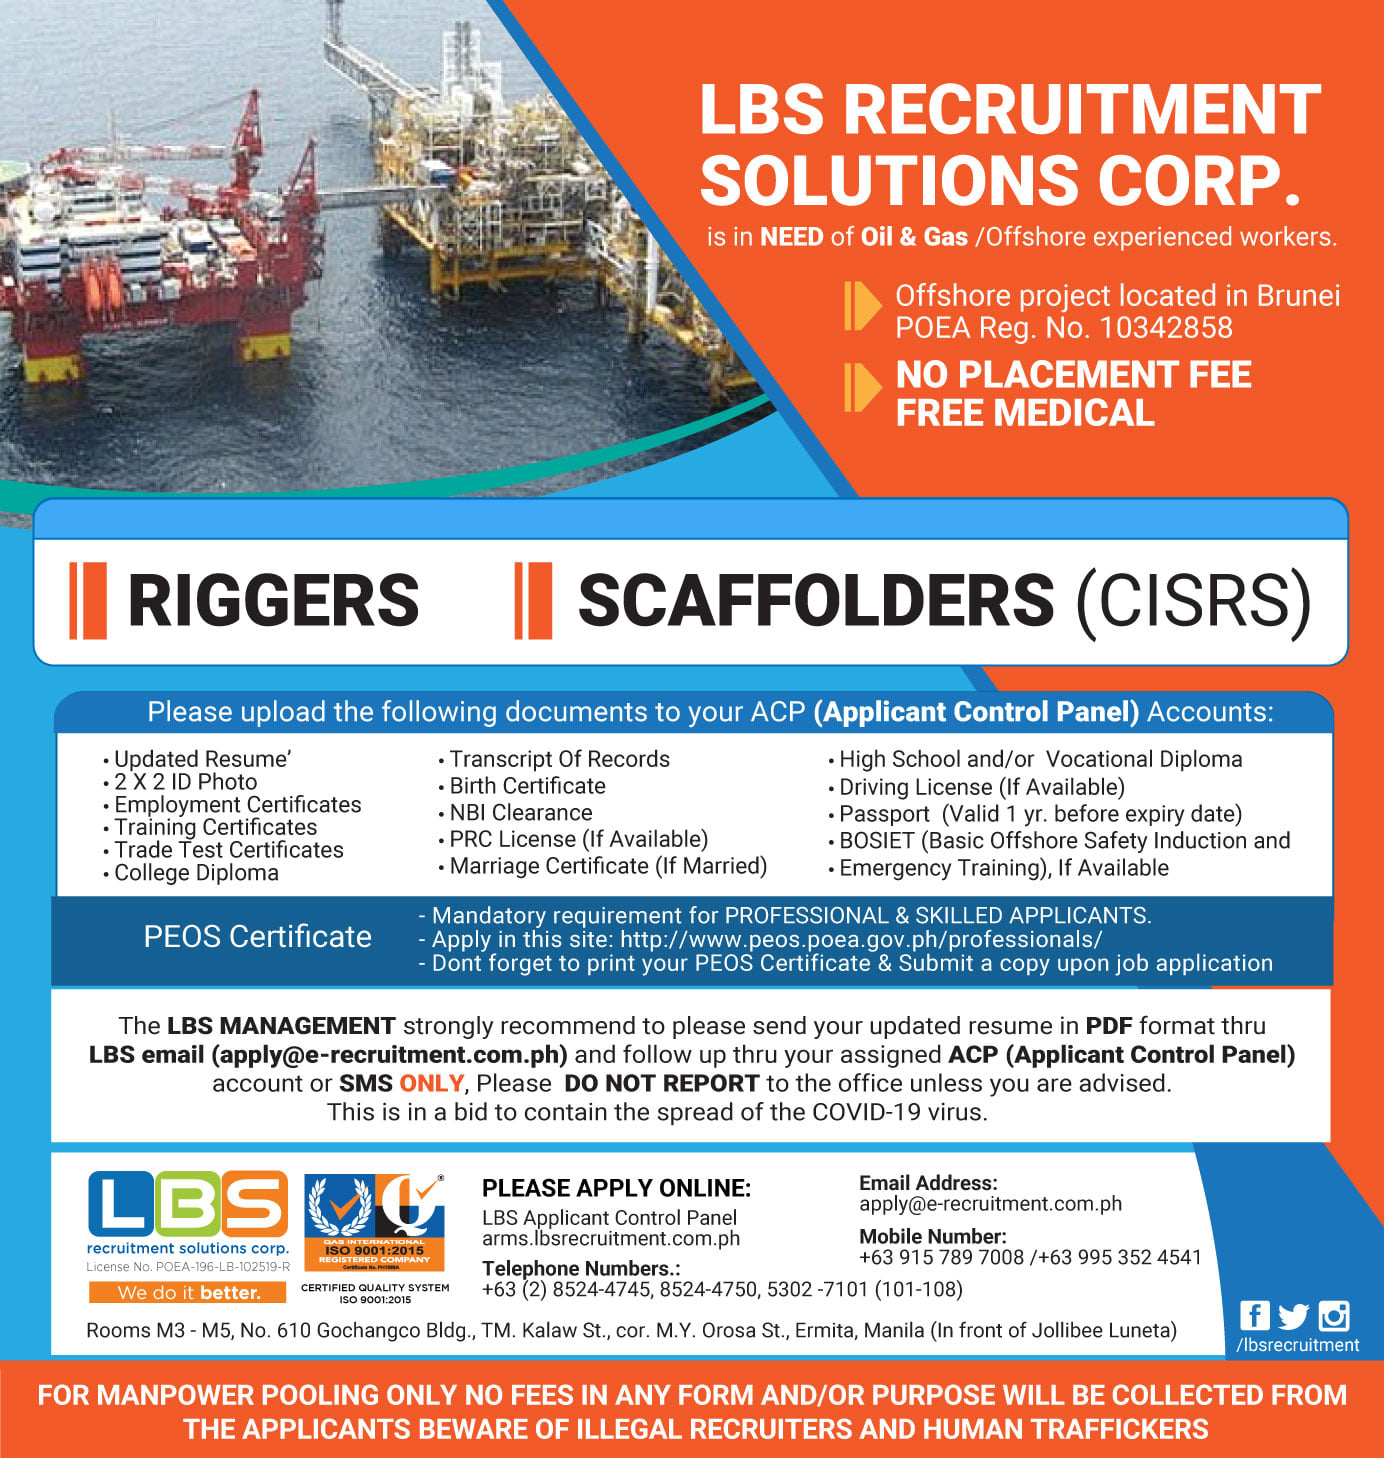 LBS Recruitment Solutions Corporation